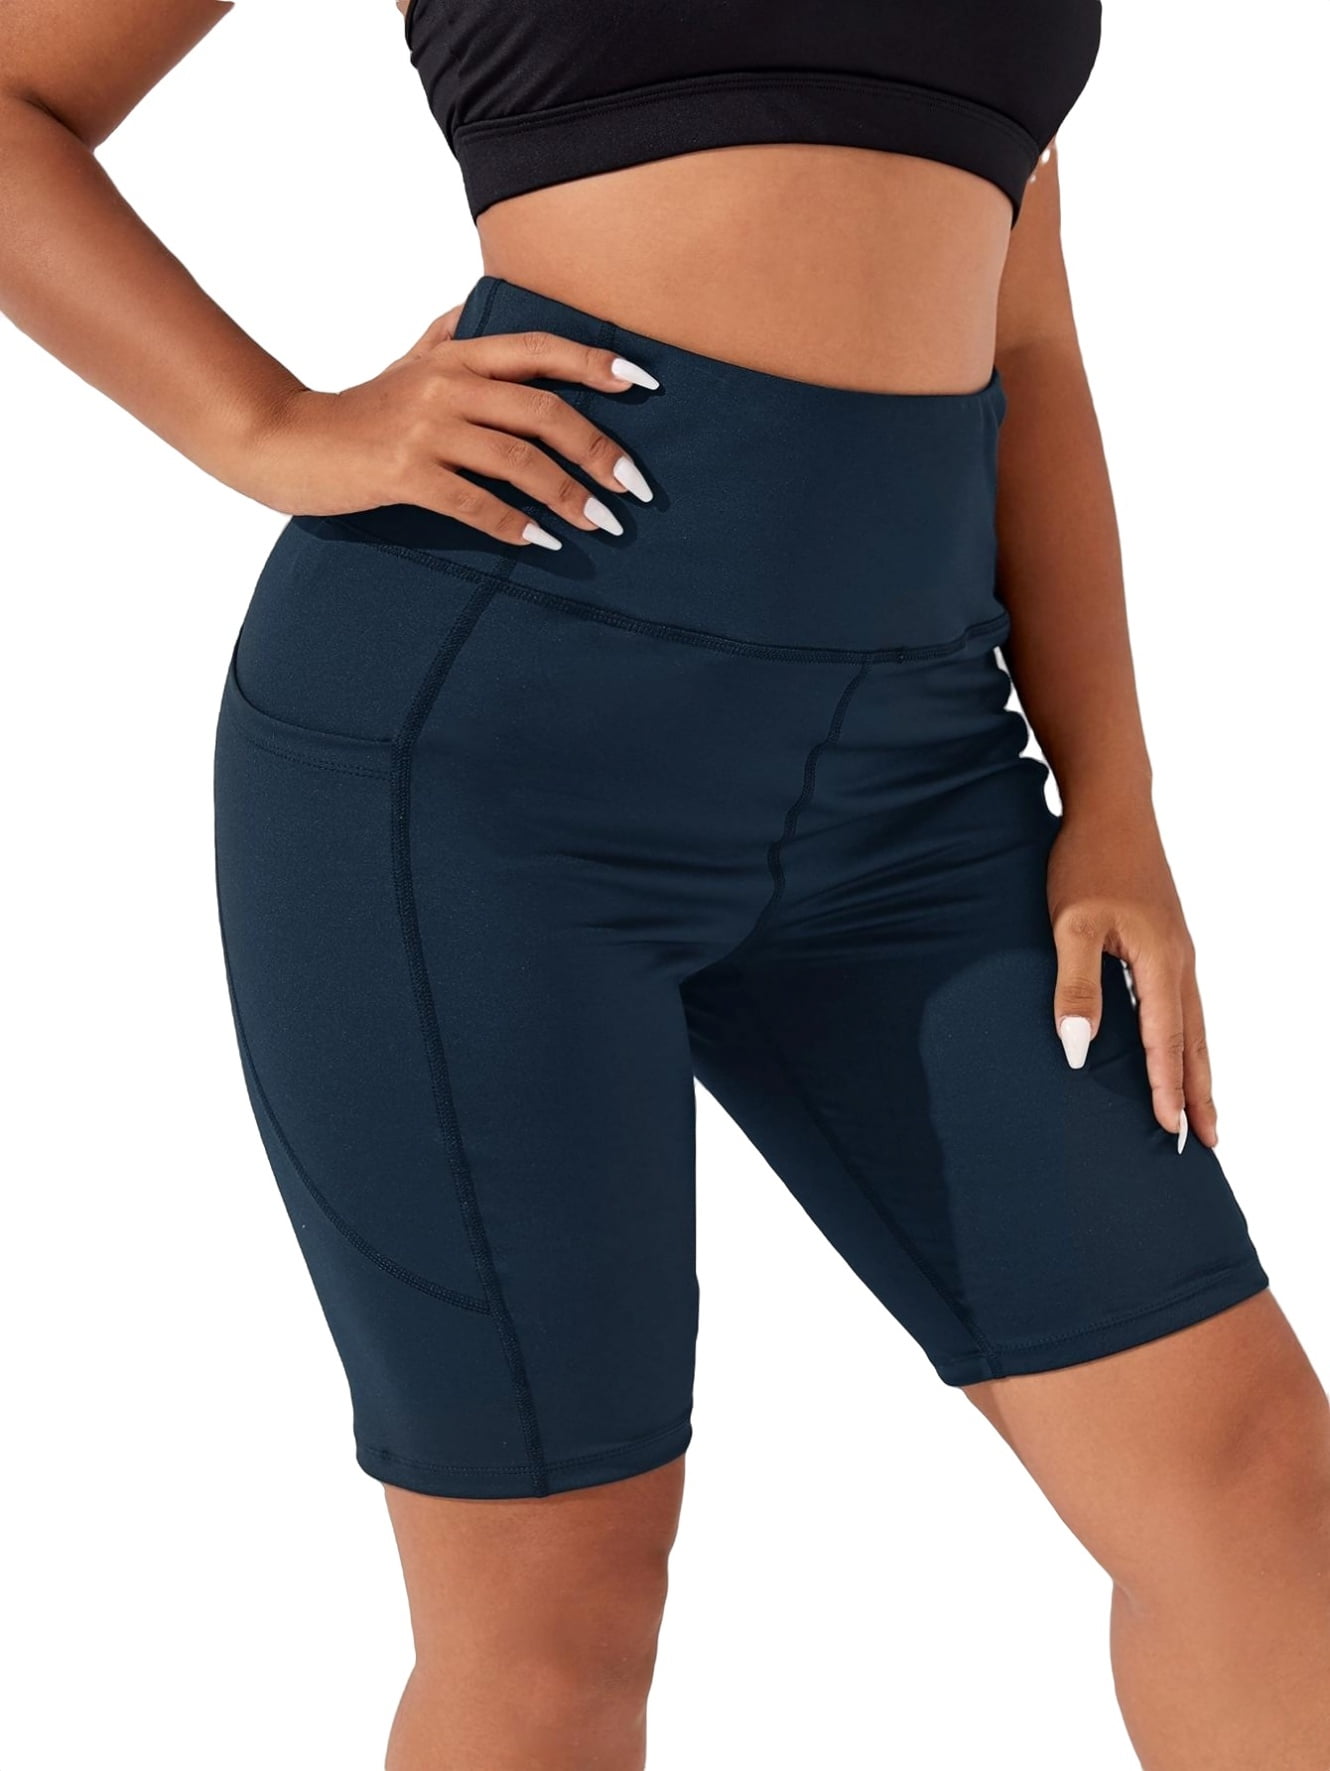 Women's Plus Size High Waisted Yoga Shorts High Stretch Biker Shorts With  Phone Pocket Tummy Control Workout Running 3XL(18) 